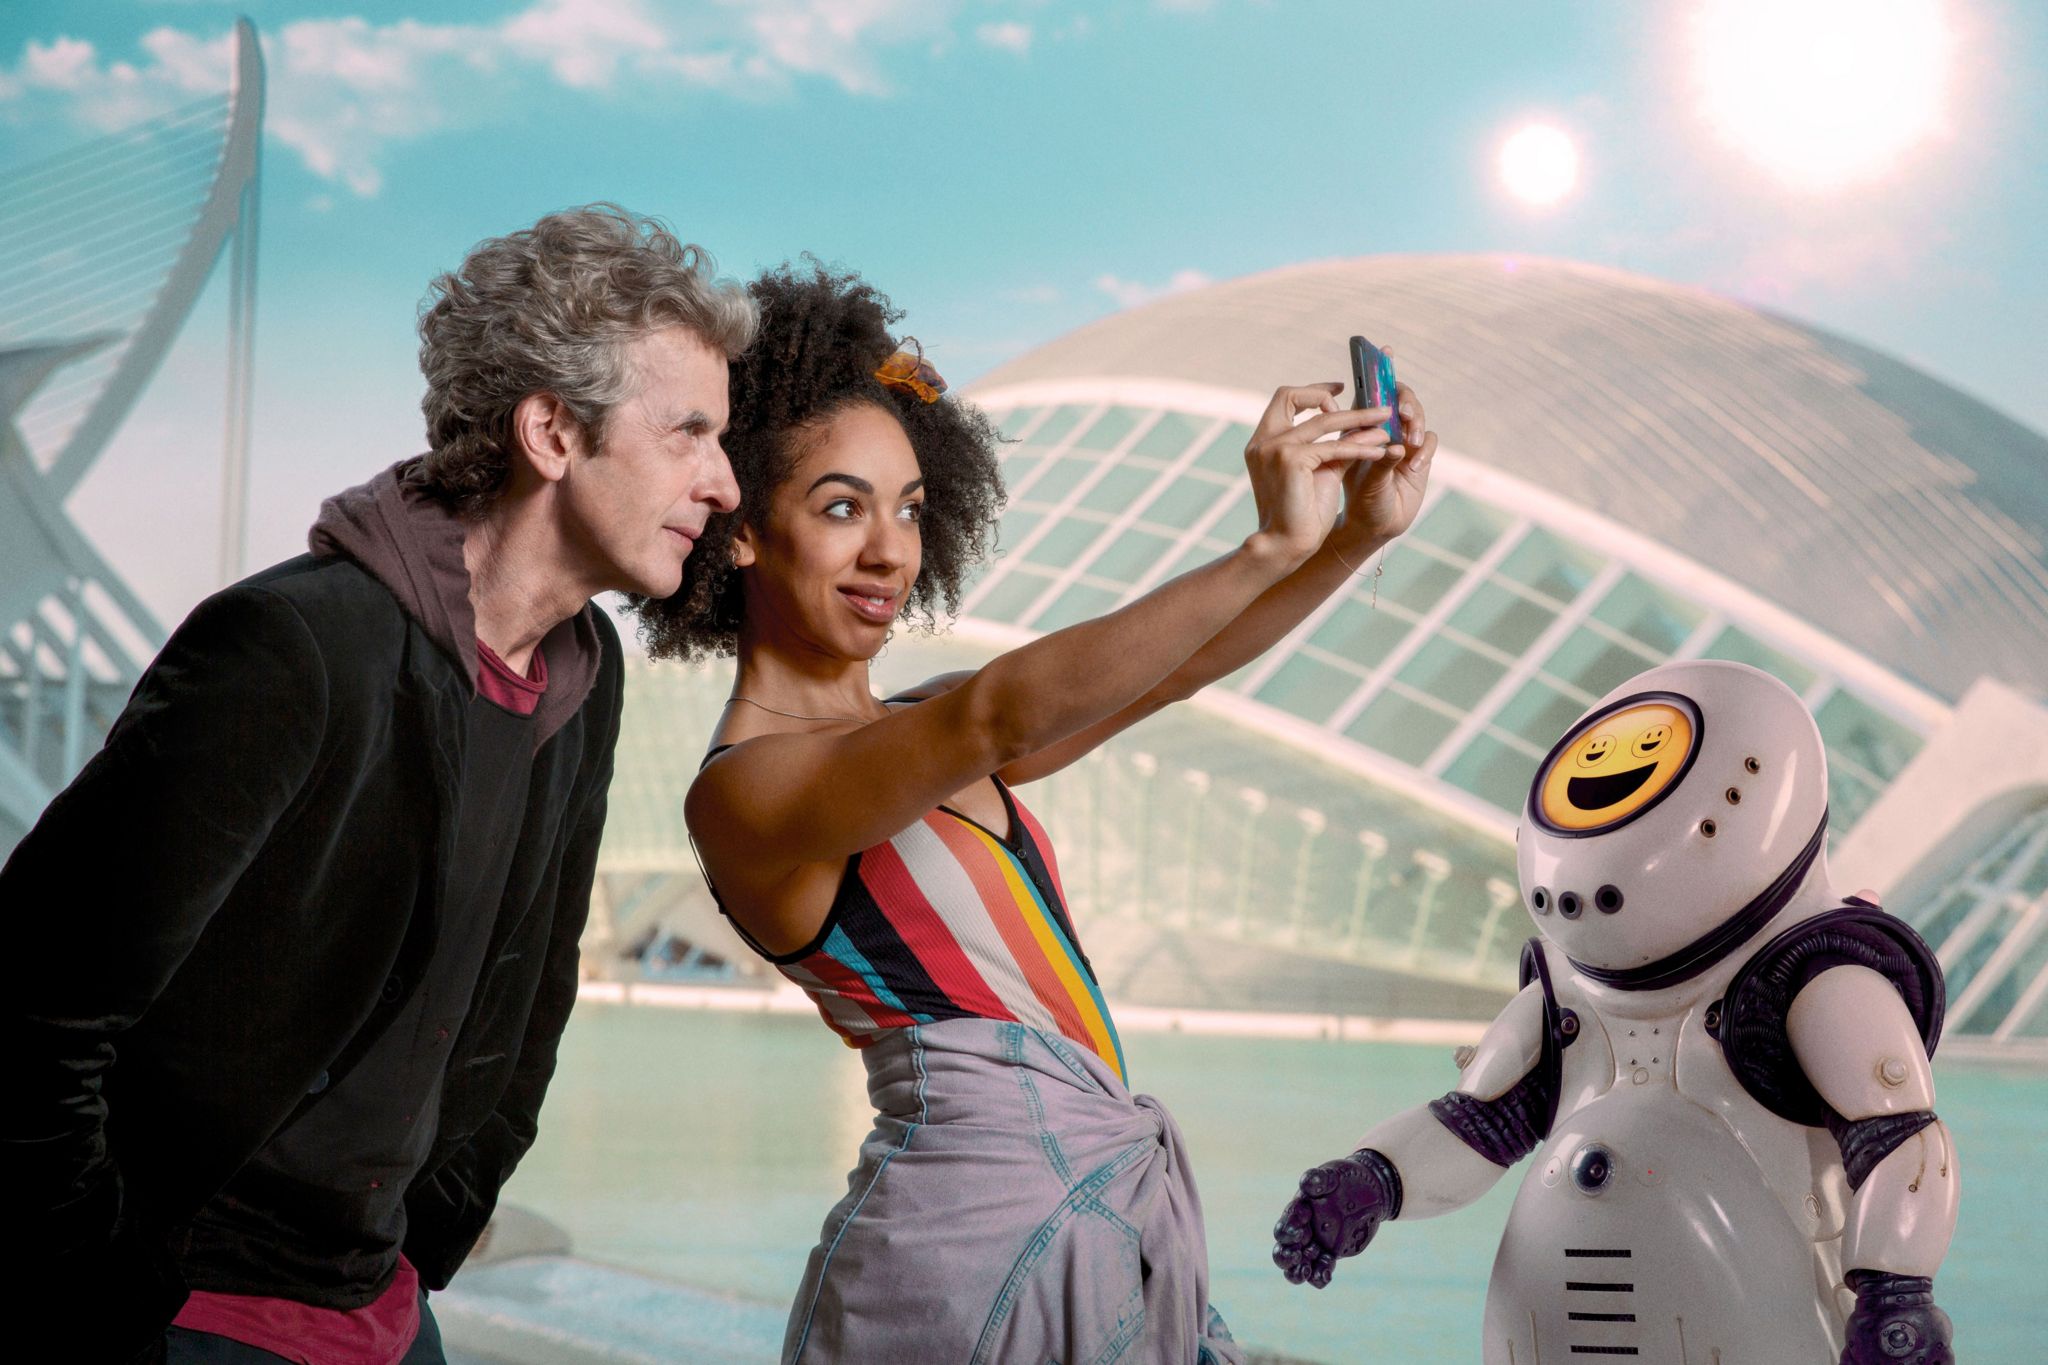 Peter Capaldi (The Doctor) and Pearl Mackie (Bill) head to a future Earth colony to discover if the people there are happy in Smile (2017)